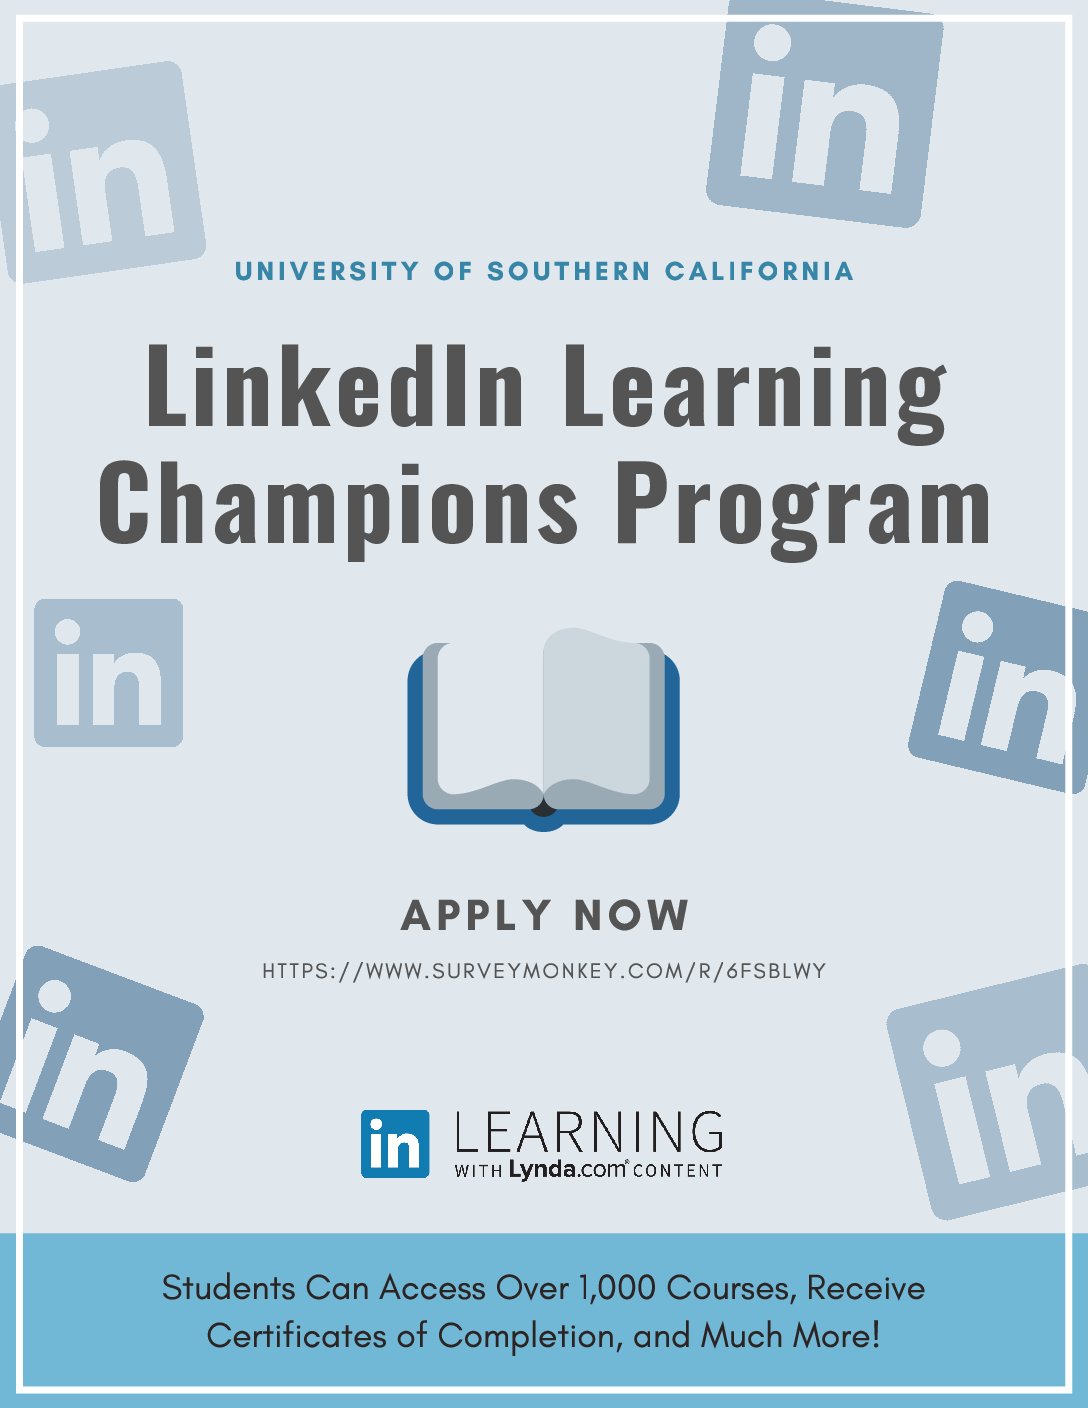 Featured image for “LinkedIn Learning Champions Program”